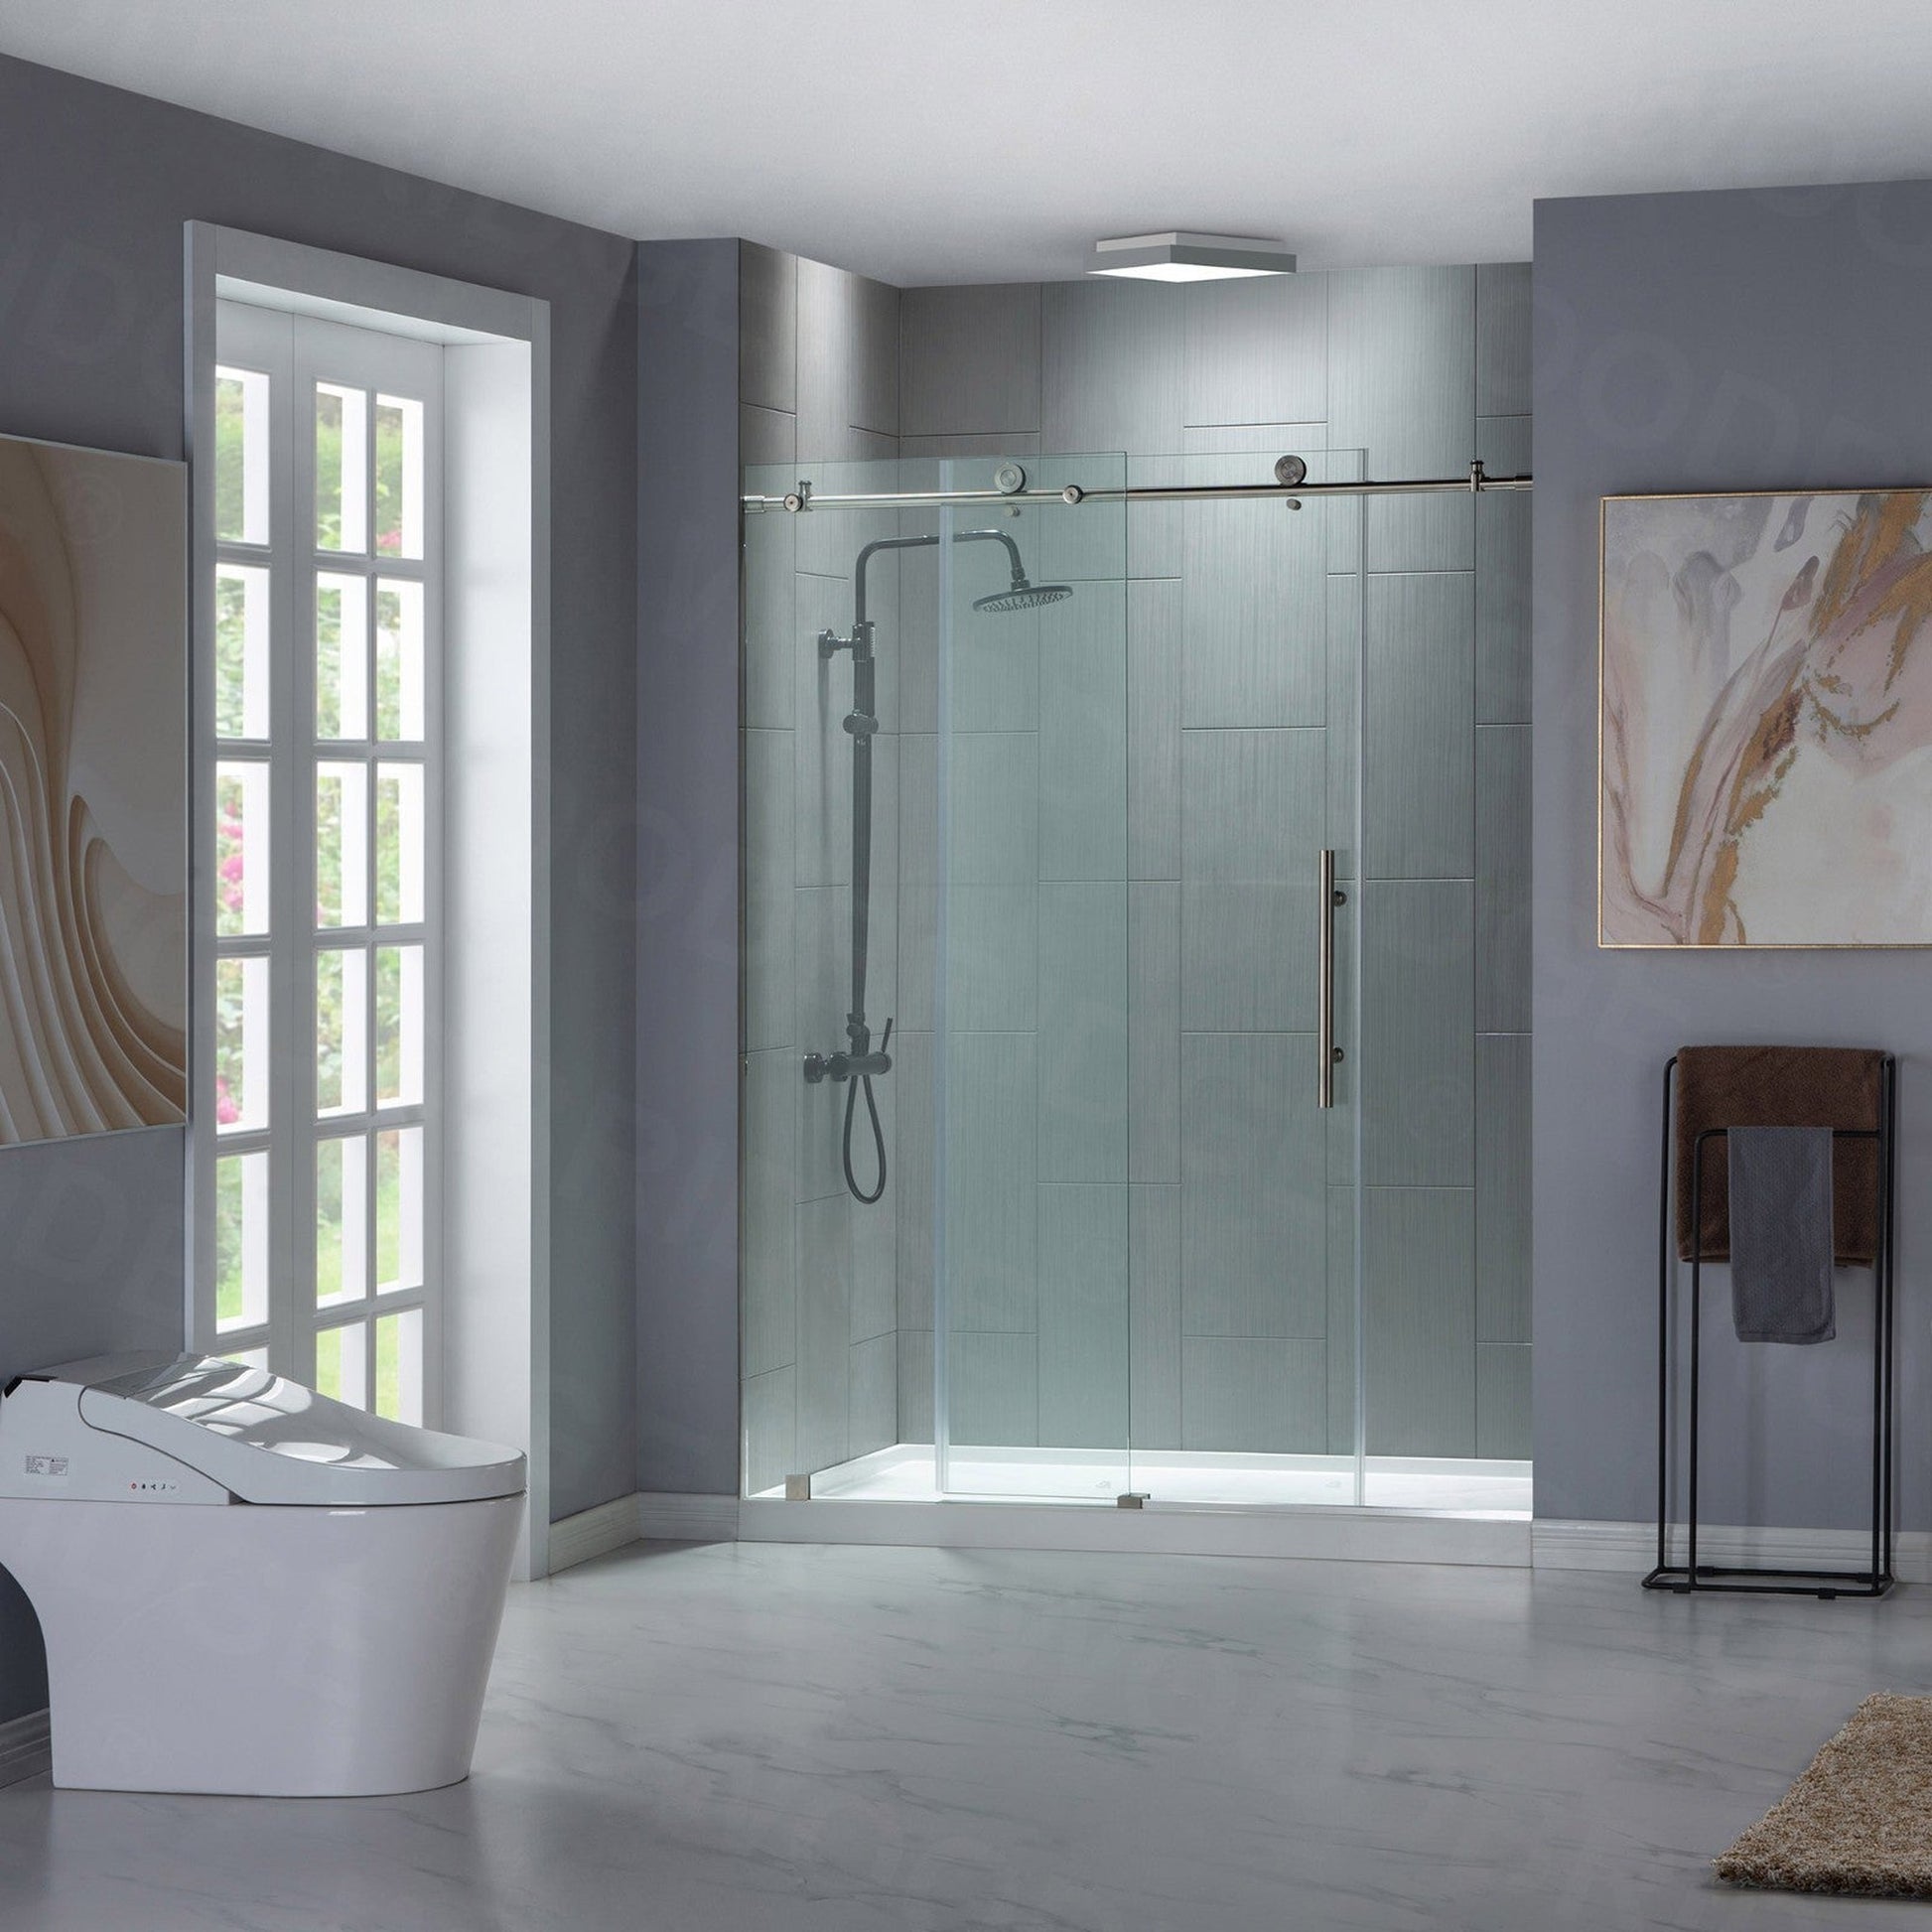 WoodBridge 60" W x 76" H Clear Tempered Glass Frameless Shower Door With Brushed Nickel Hardware Finish